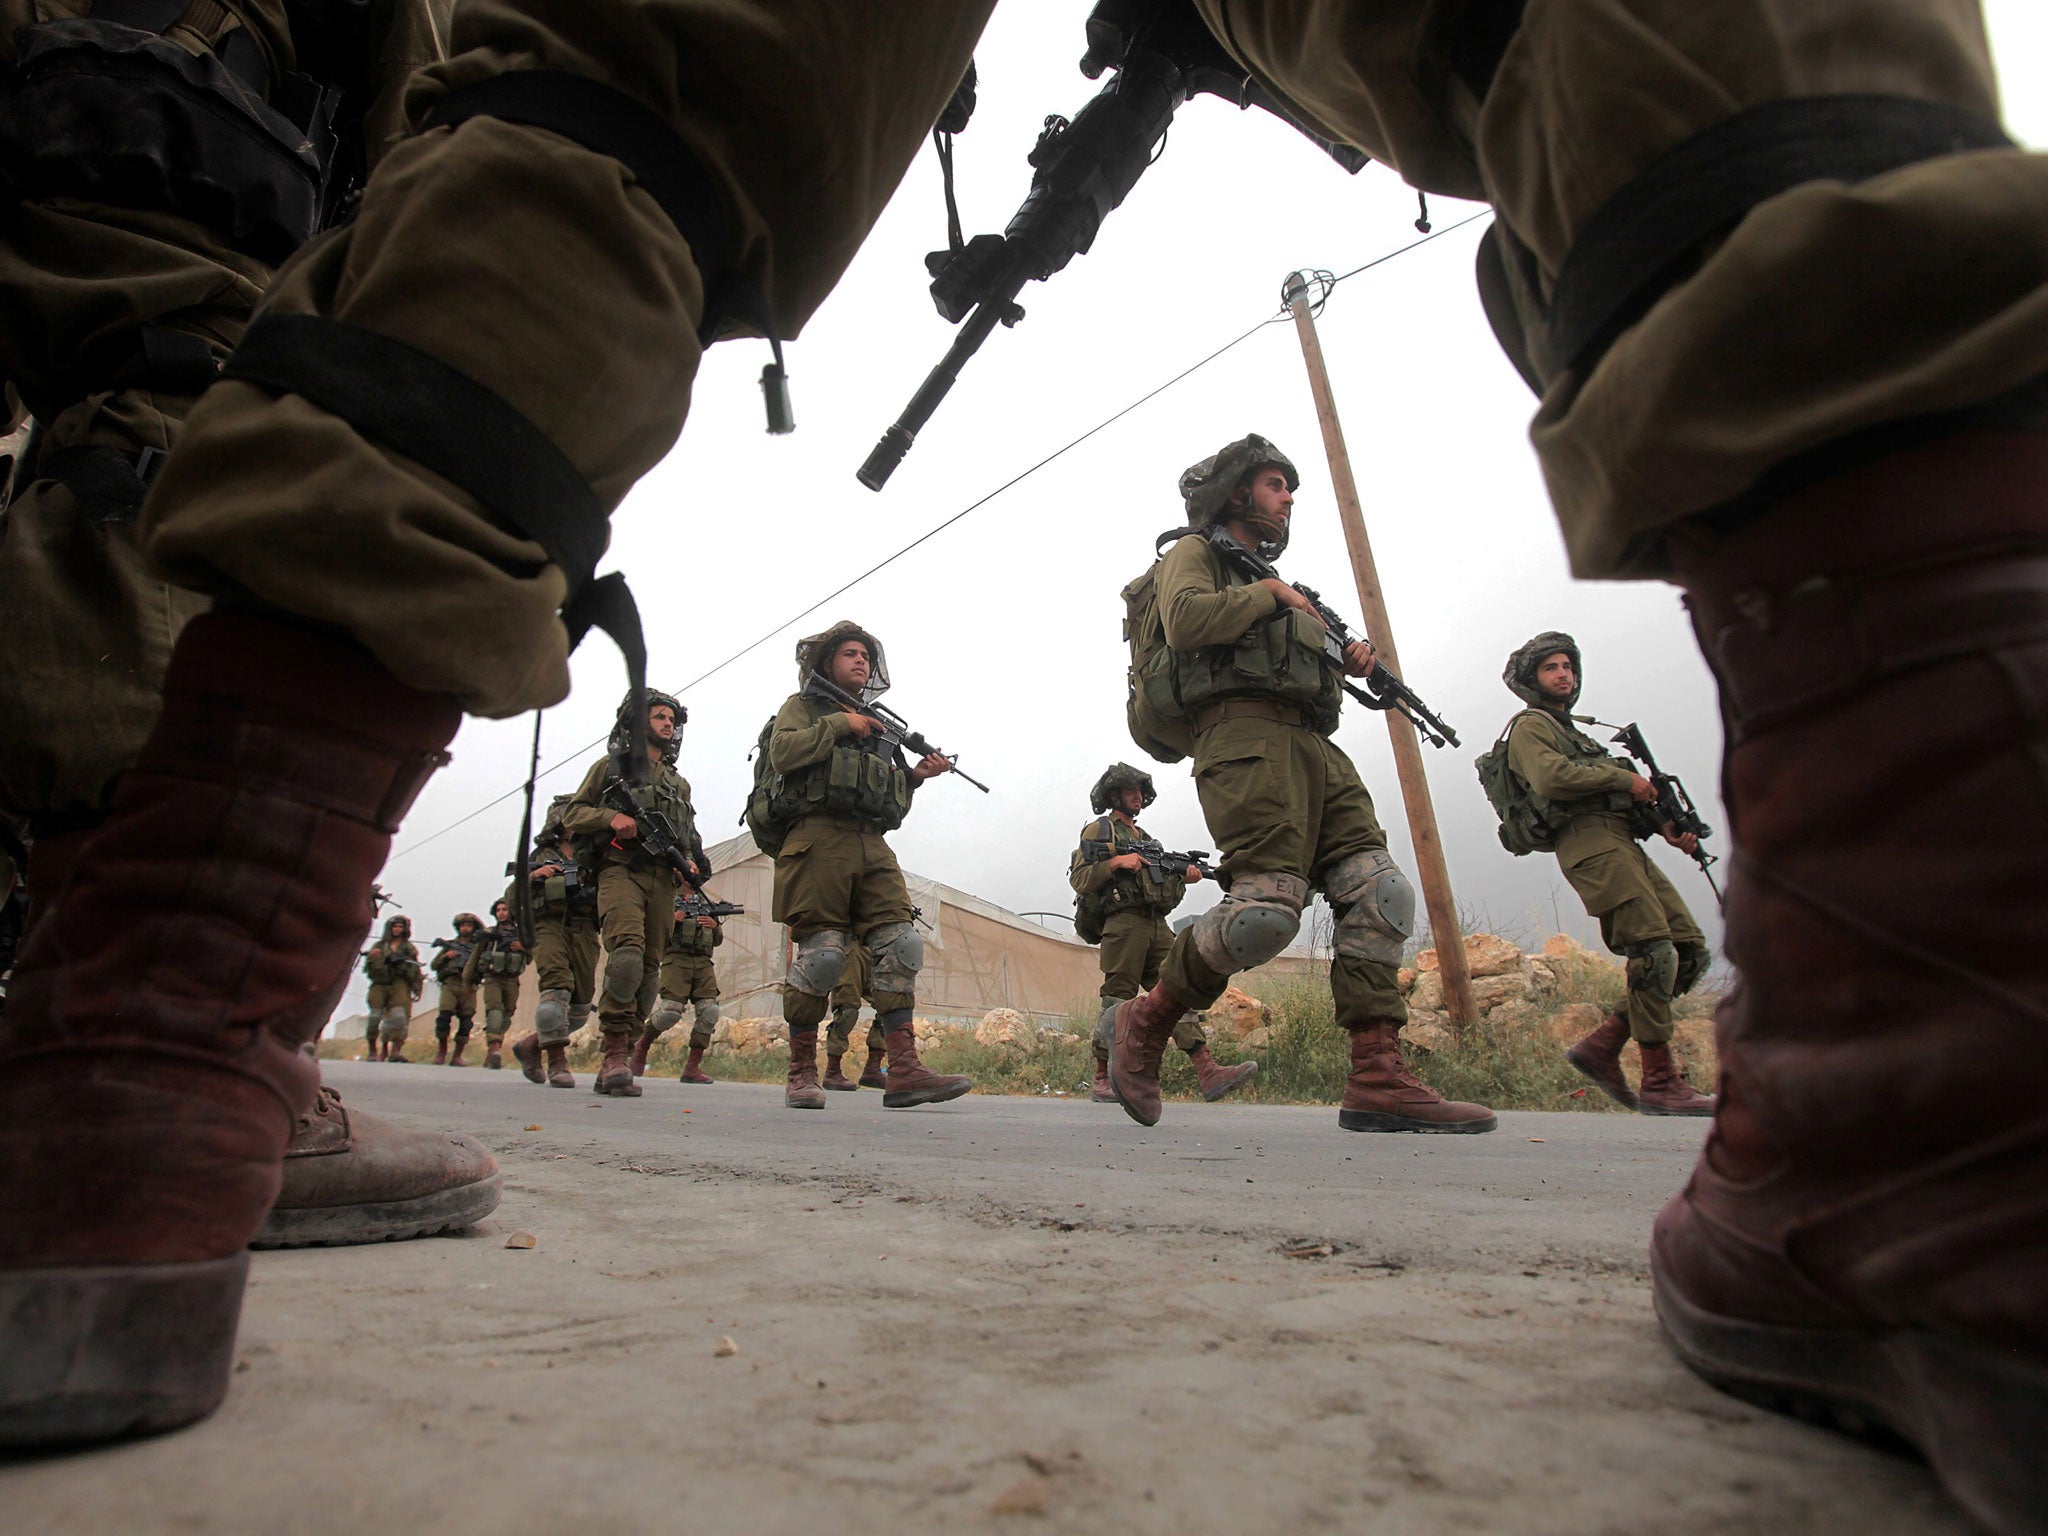 Israeli soldiers on patrol - a Palestinian has been shot and killed after they attacked two Israelis in the West Bank